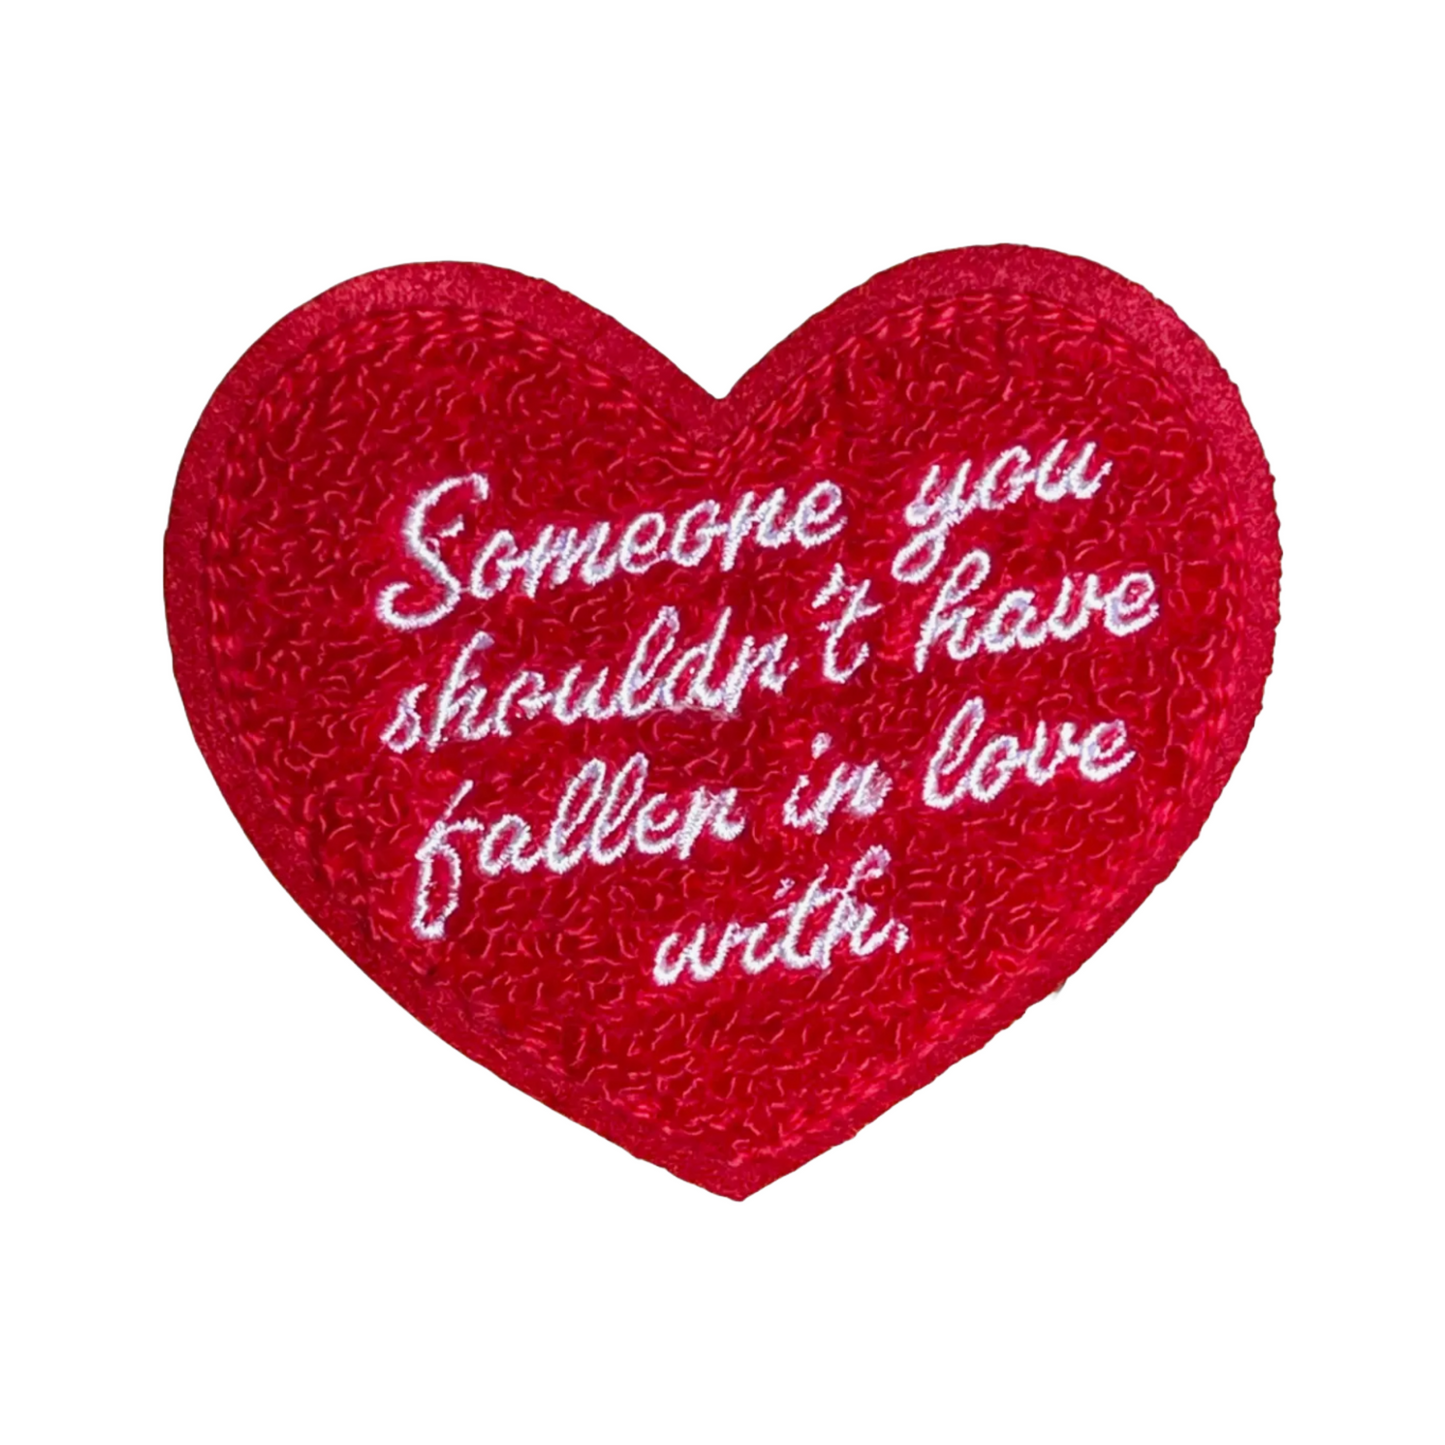 Fallen In Love Patch by World Famous Original